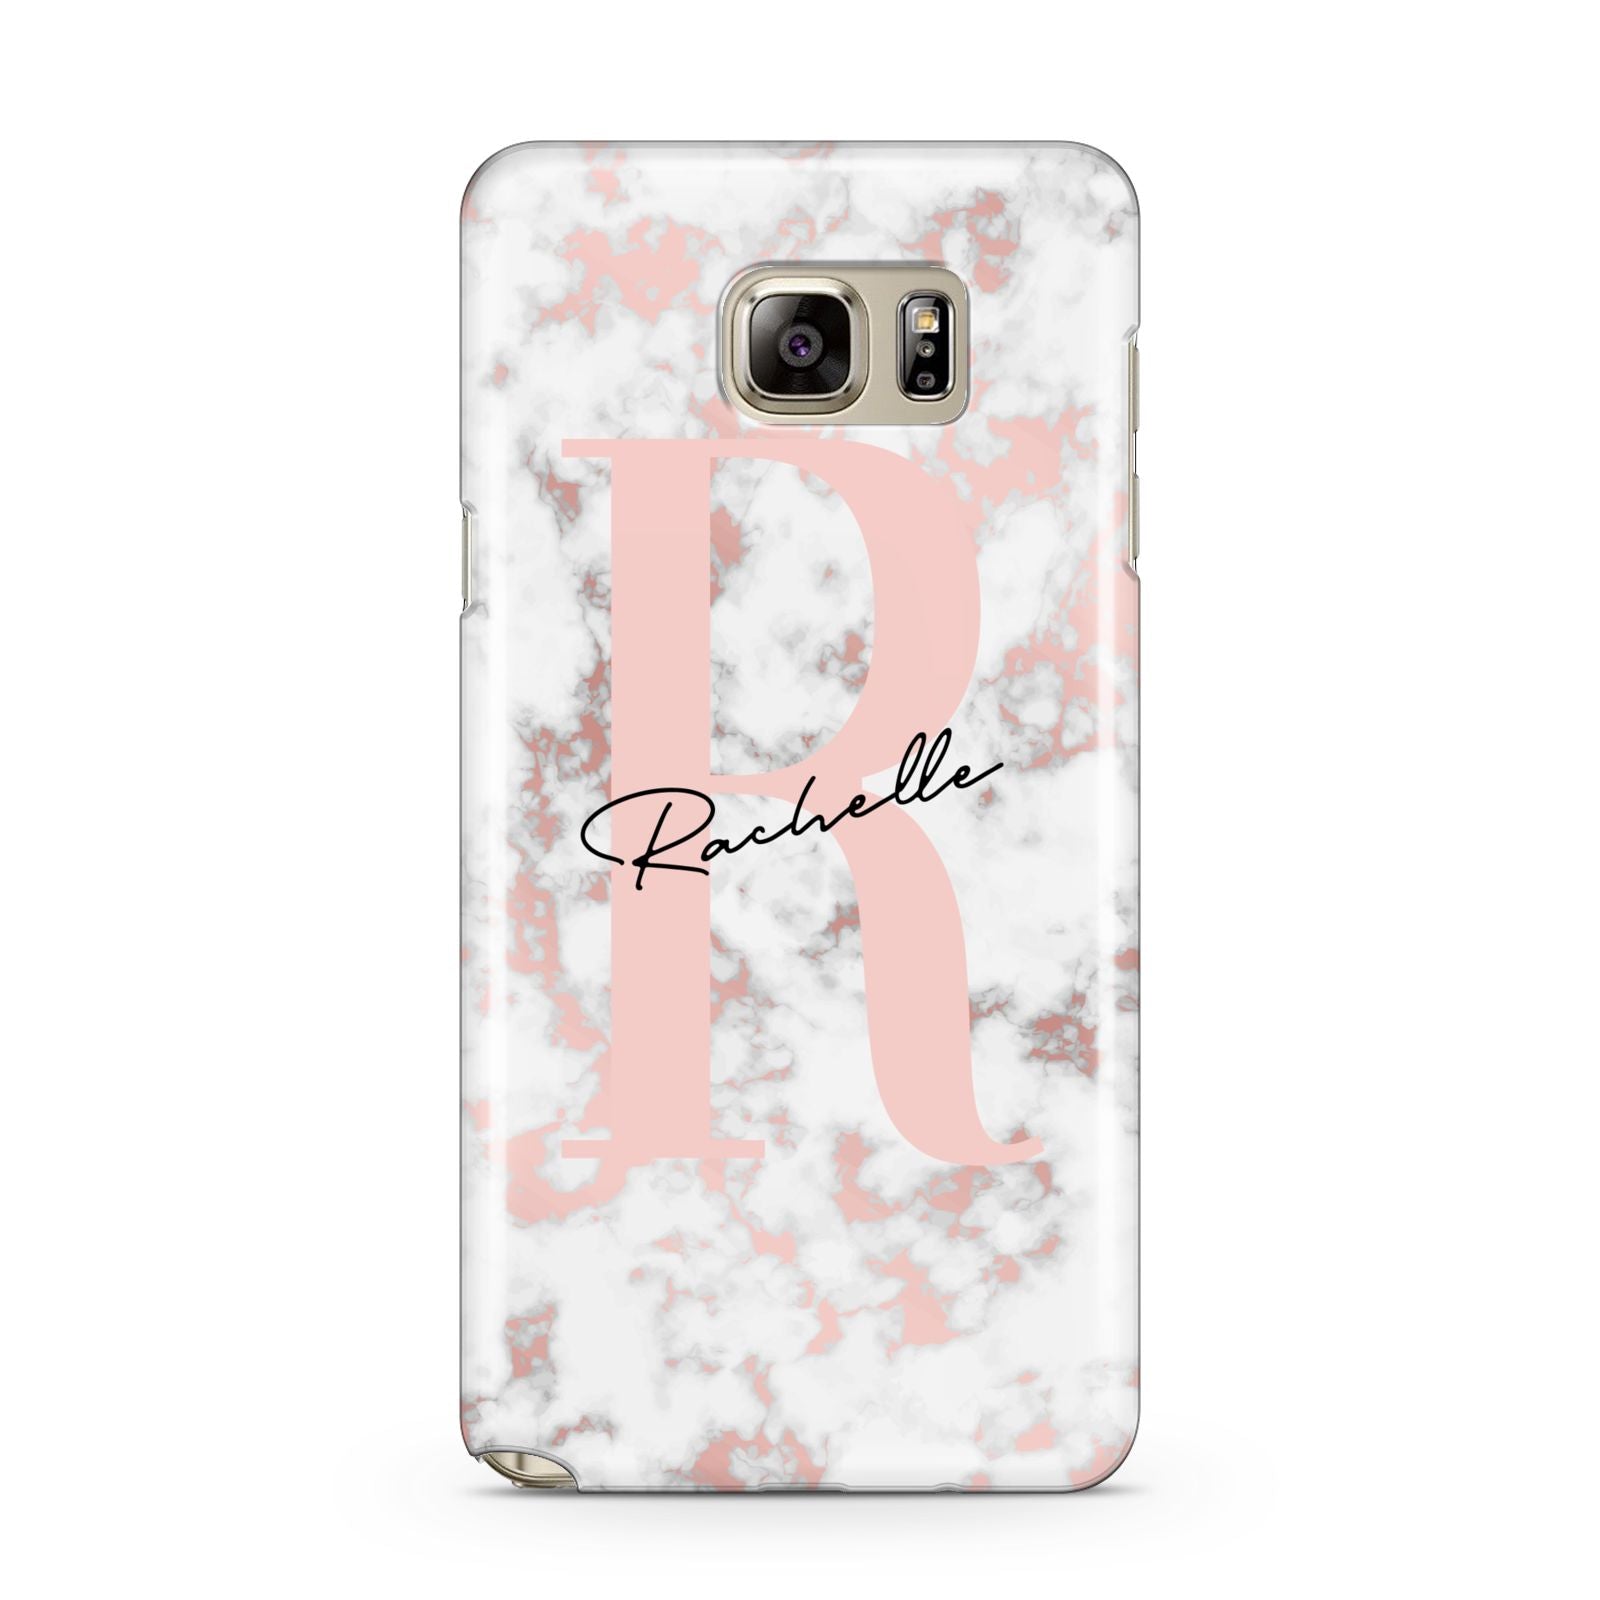 Monogrammed Rose Gold Marble Samsung Galaxy Note 5 Case